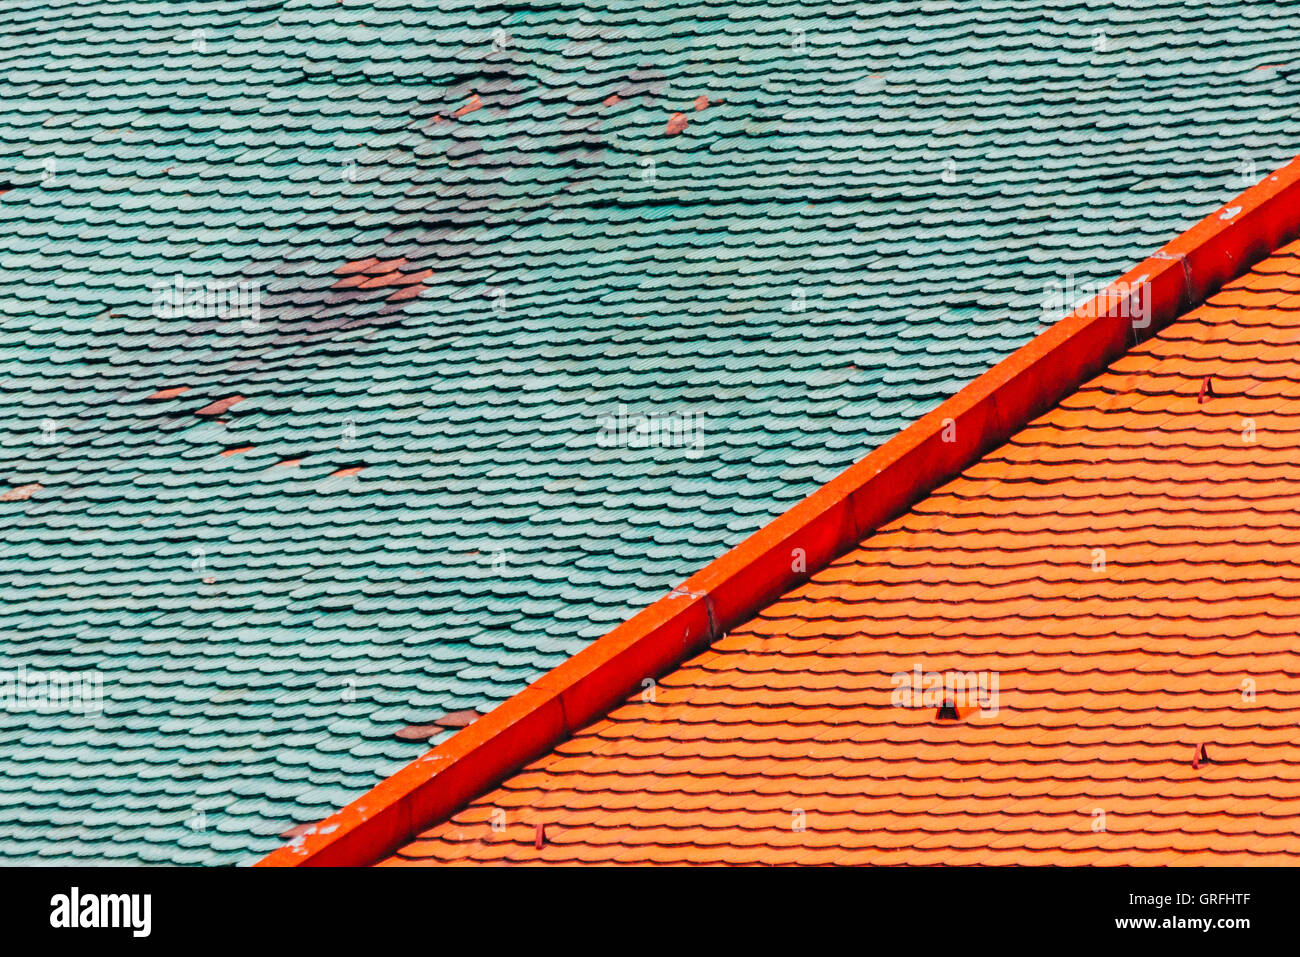 Green and red roof tiles Stock Photo